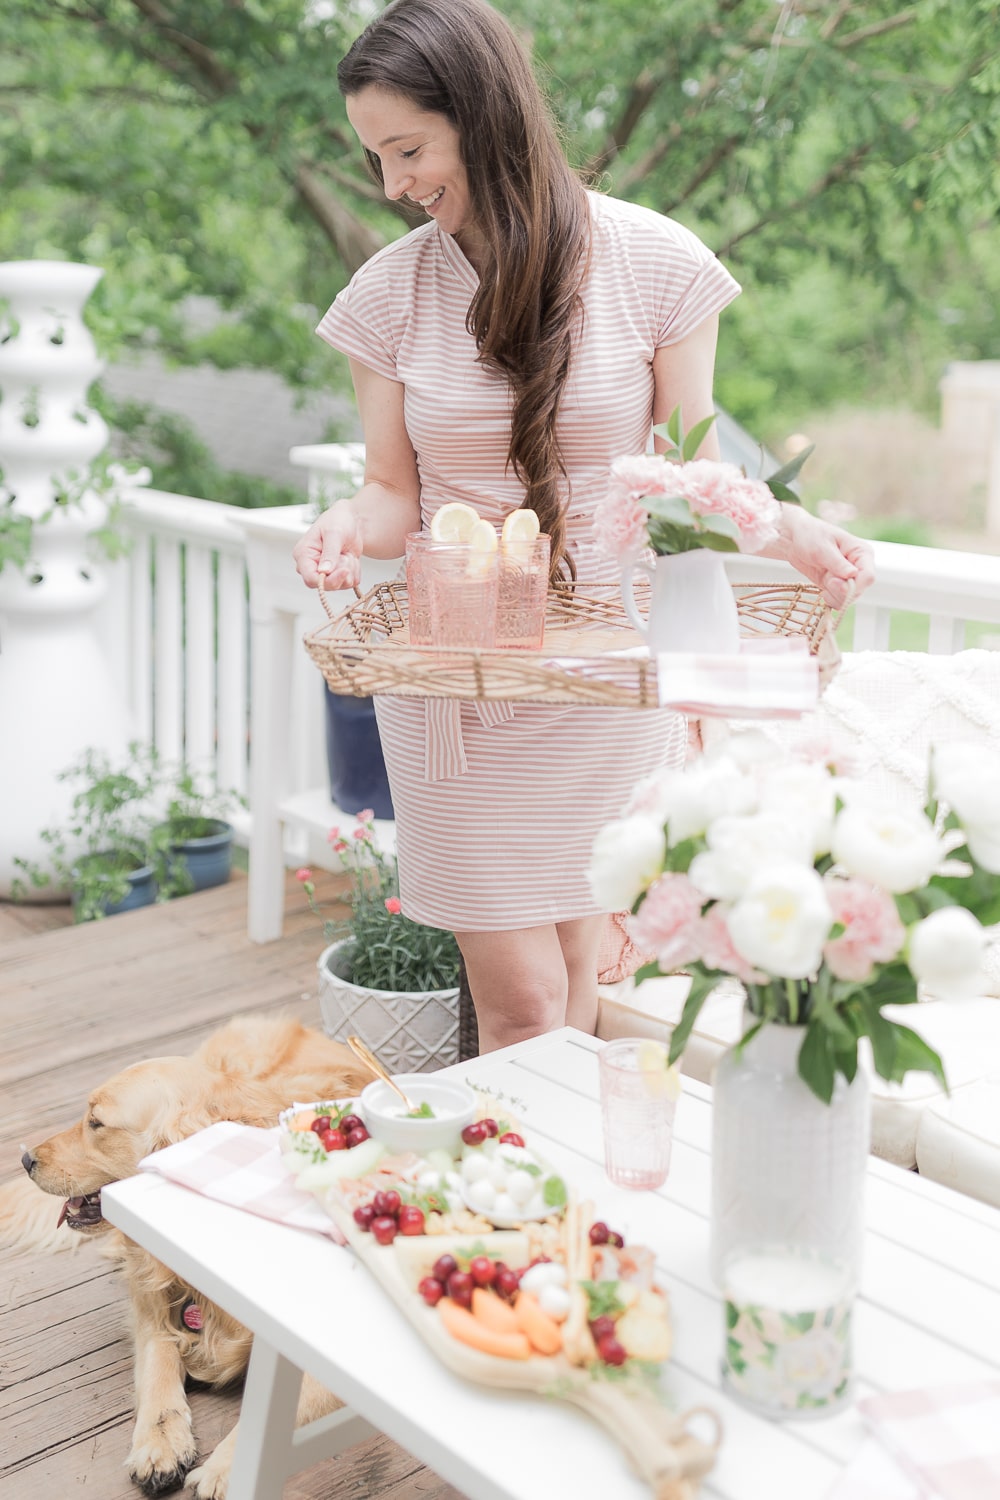 Blogger Stephanie Ziajka shares her favorite affordable home decor finds and outdoor entertaining essentials for summer, all of which is from Walmart, on Diary of a Debutante